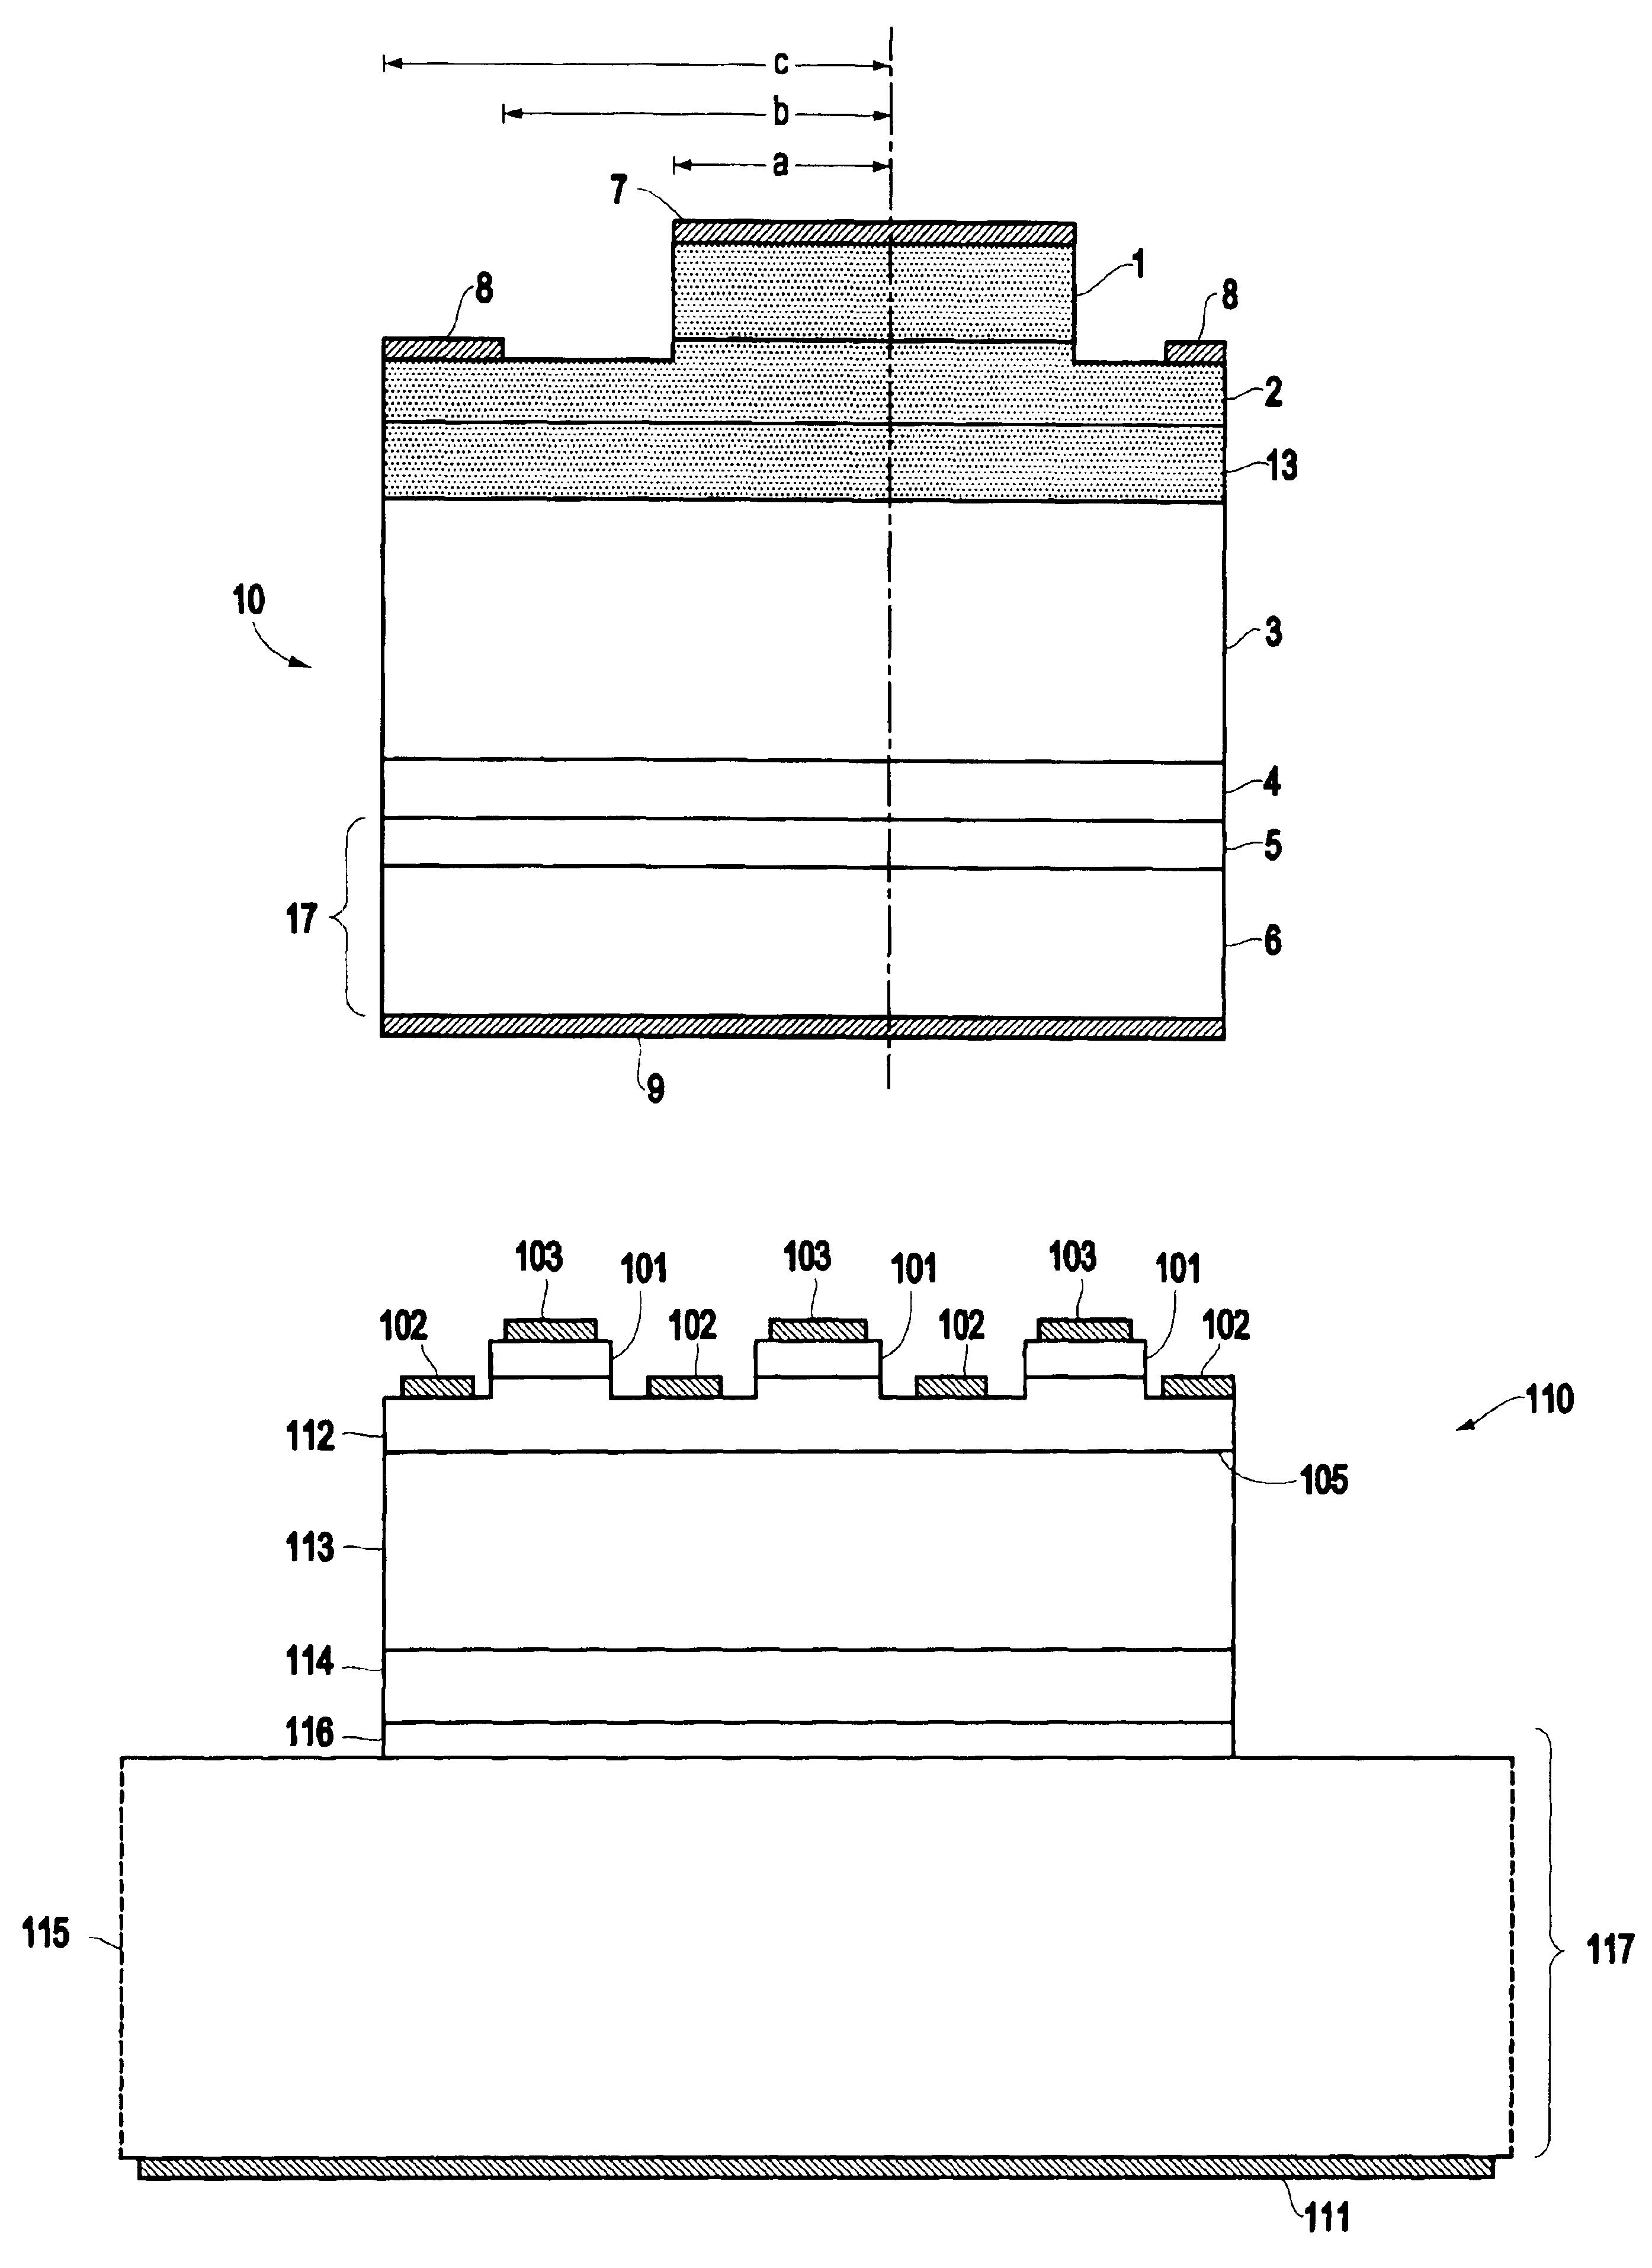 Processing technique to improve the turn-off gain of a silicon carbide gate turn-off thyristor and an article of manufacture